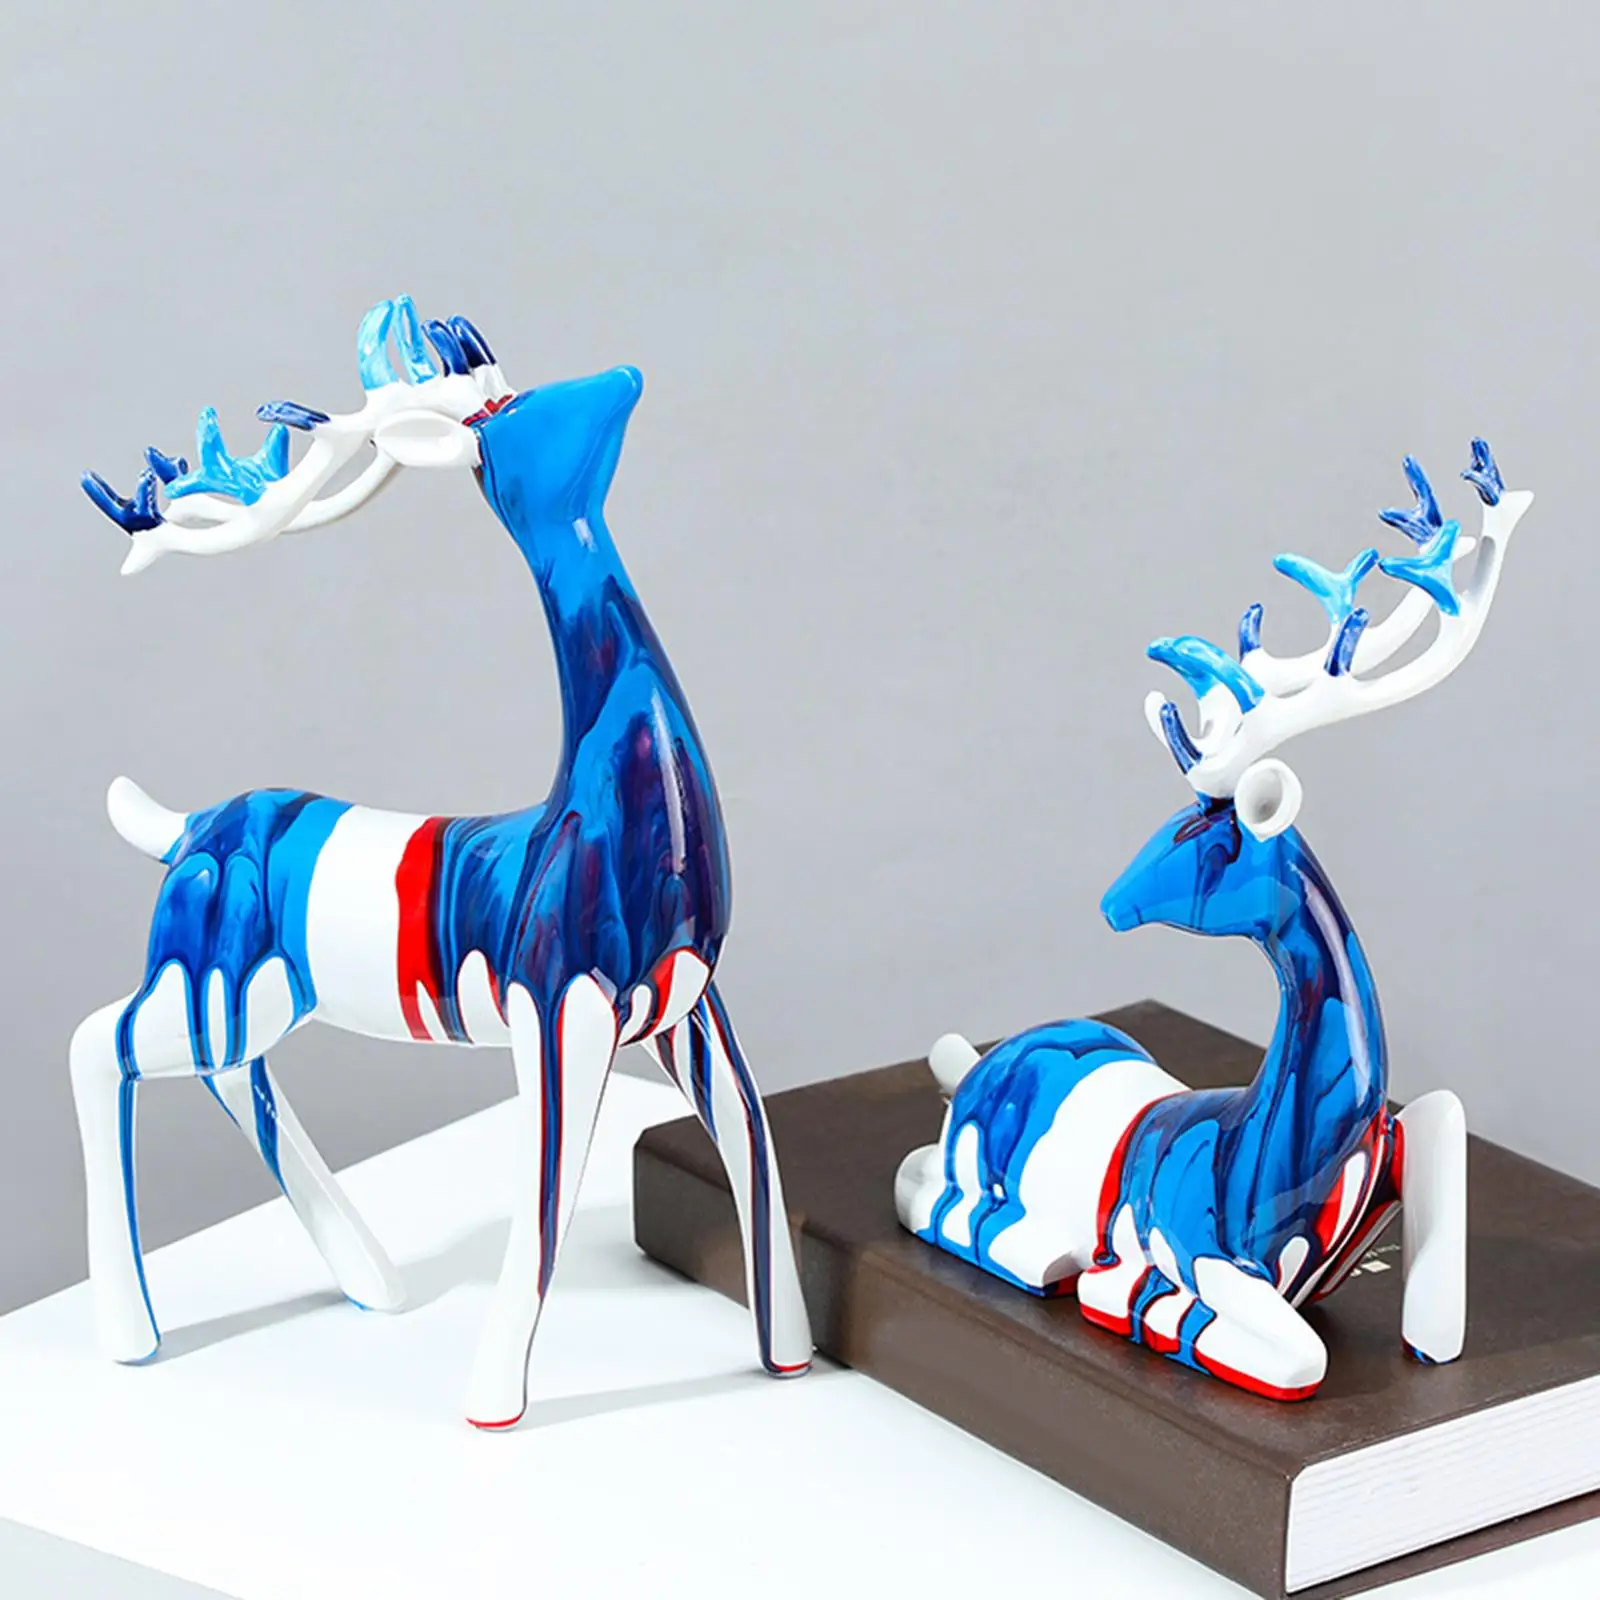 2x European Style Reindeer Figurine Sitting Standing Deer Statues Accents for Home Living Room Cabinet Mantle Desk Decoration